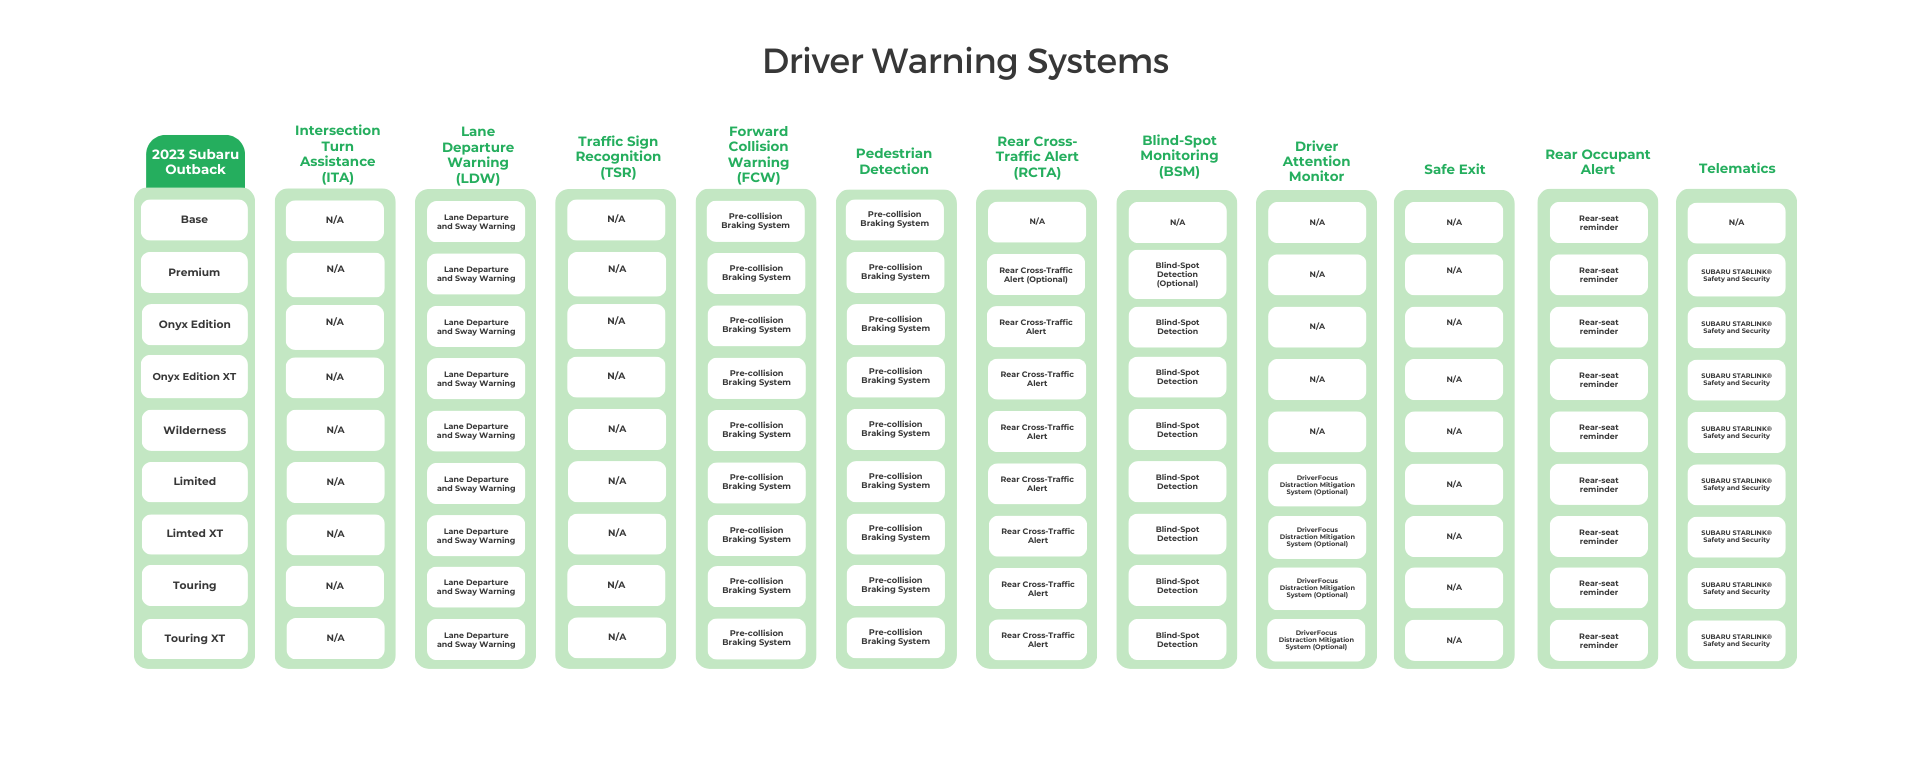 2023 Subaru Outback Driver Warning Systems